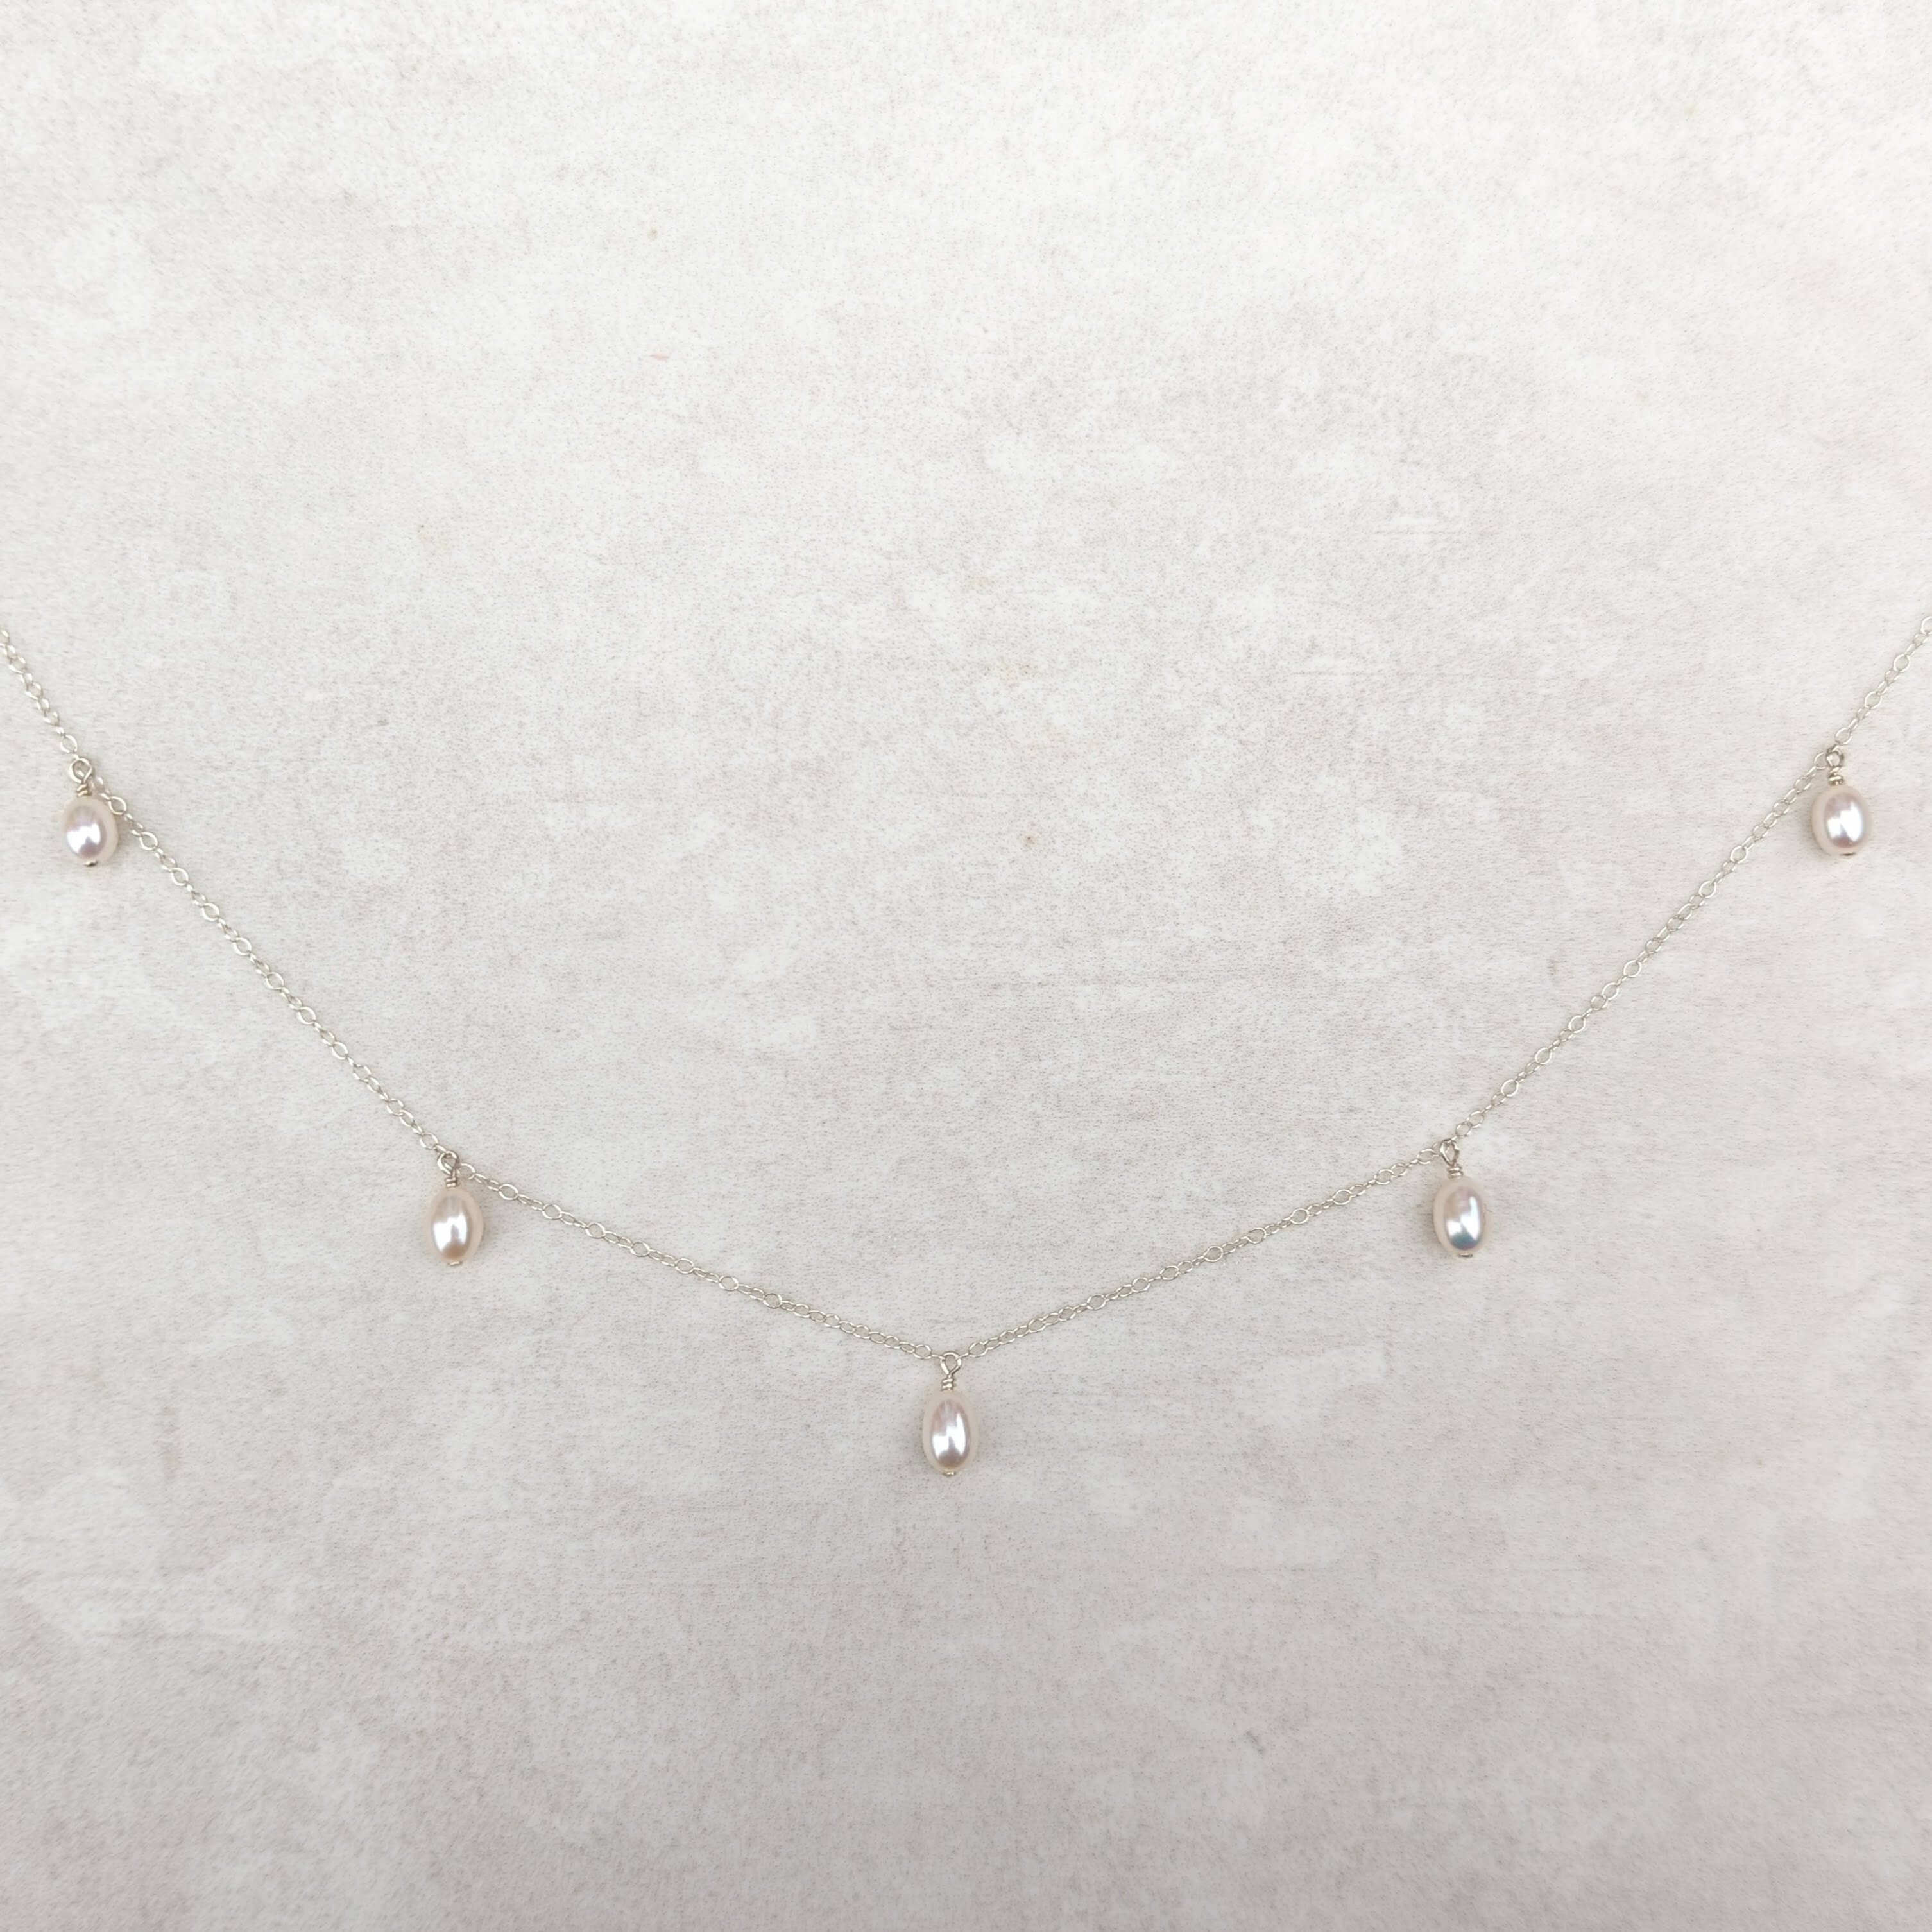 five small pearl pendants on a thin silver chain necklace